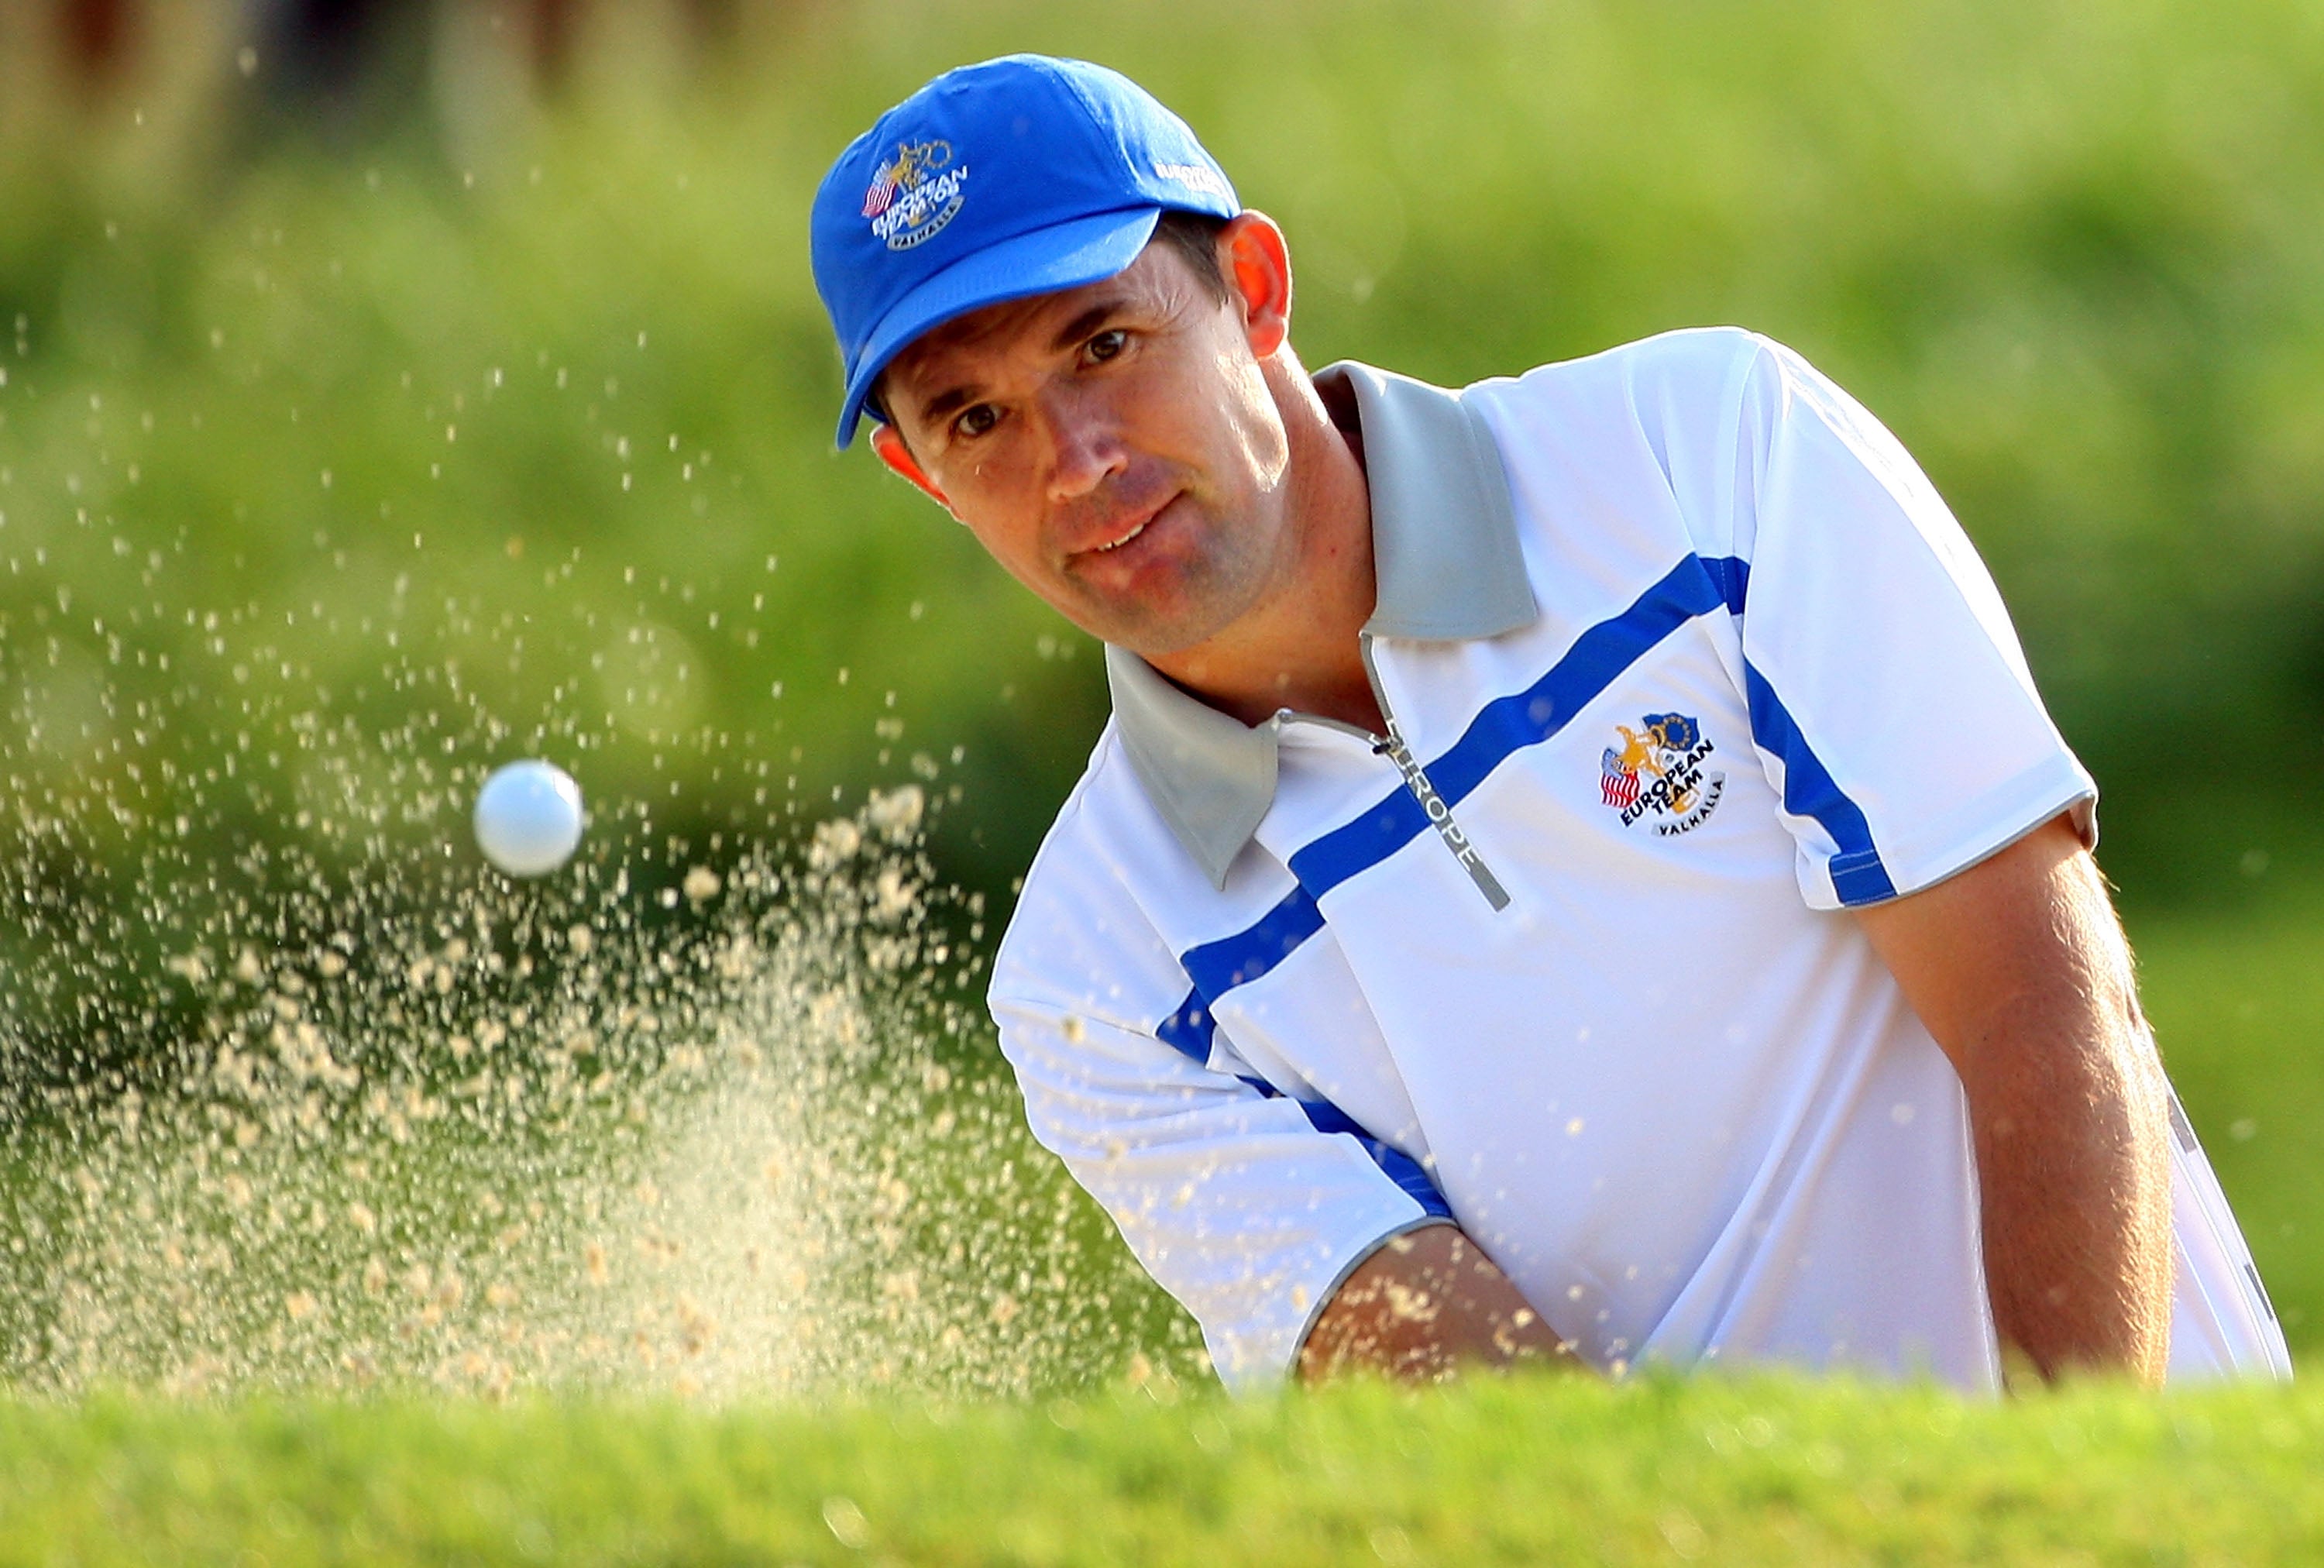 Harrington has played in six Ryder Cups, winning four